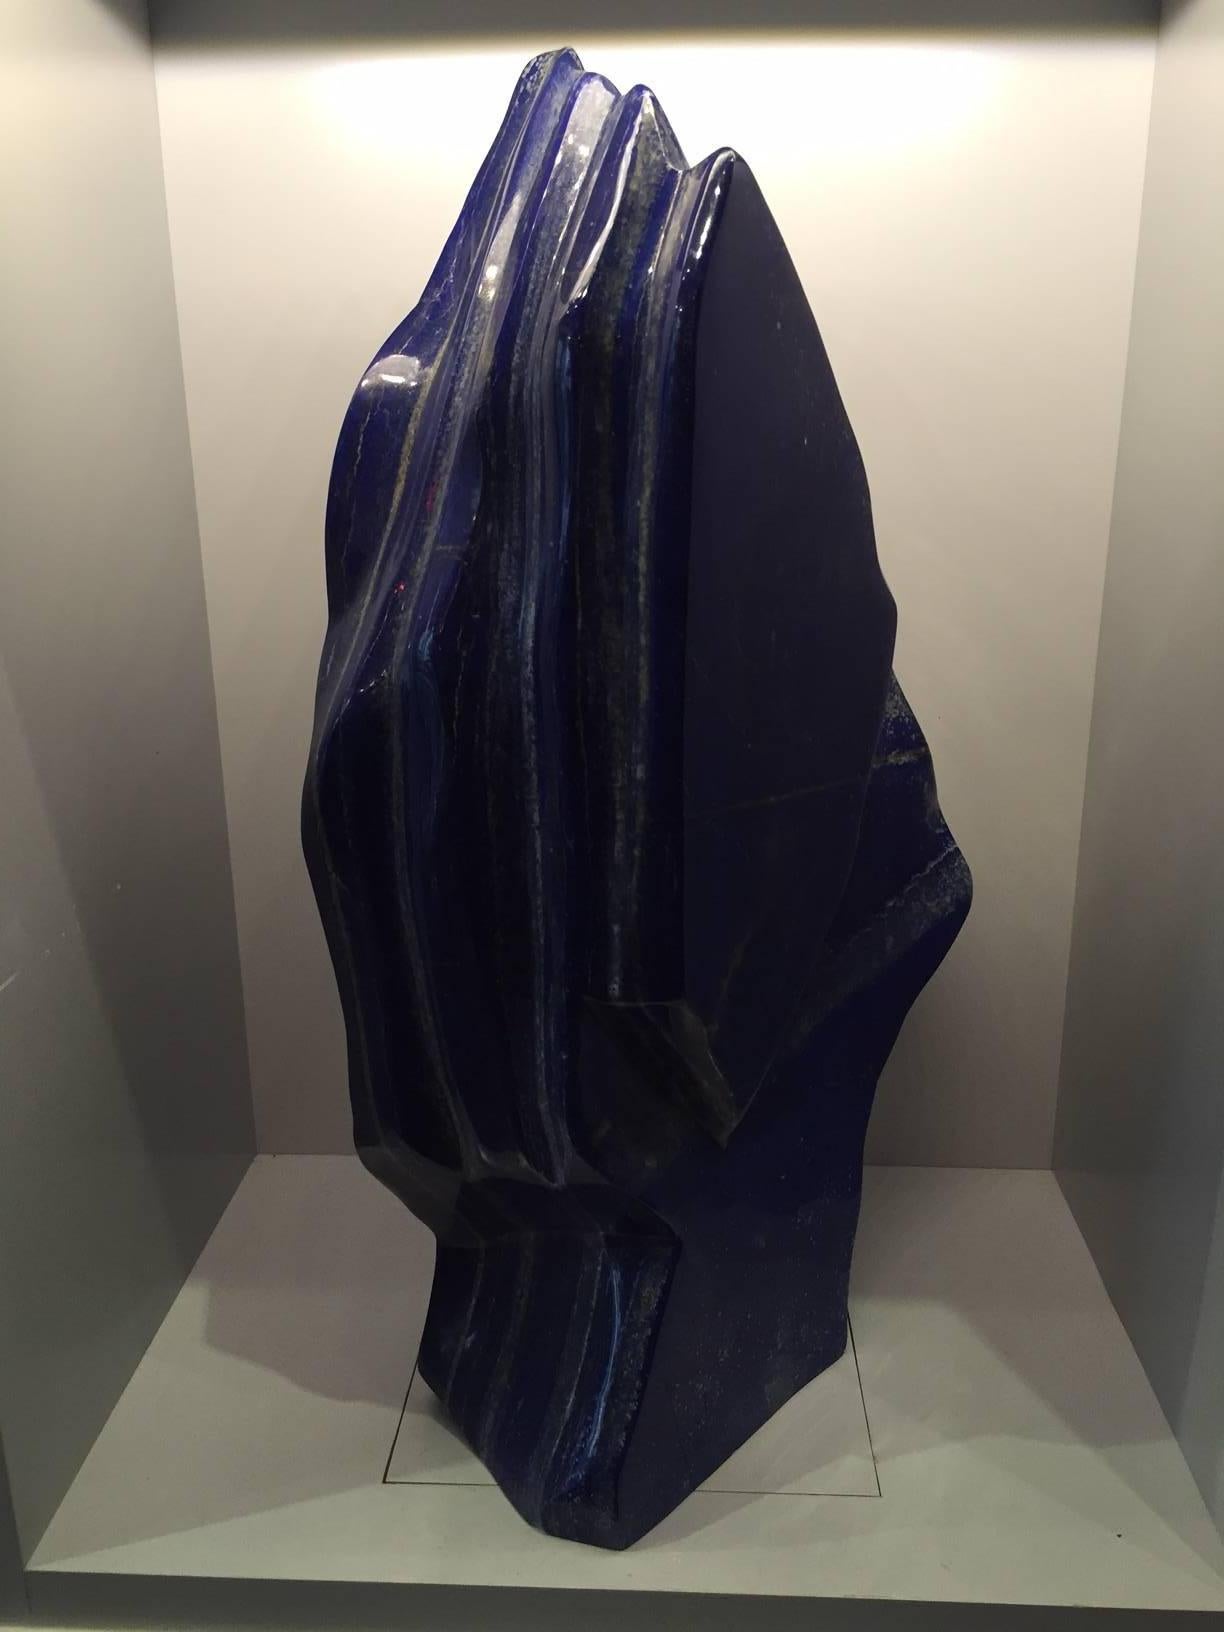 Very large polished lapis lazuli mineral specimen from Afghanistan, free standing and weighing 85 lbs. This semi-precious stone has been prized since antiquity due to its intense, beautiful blue coloring and golden speckles. It was also used in the